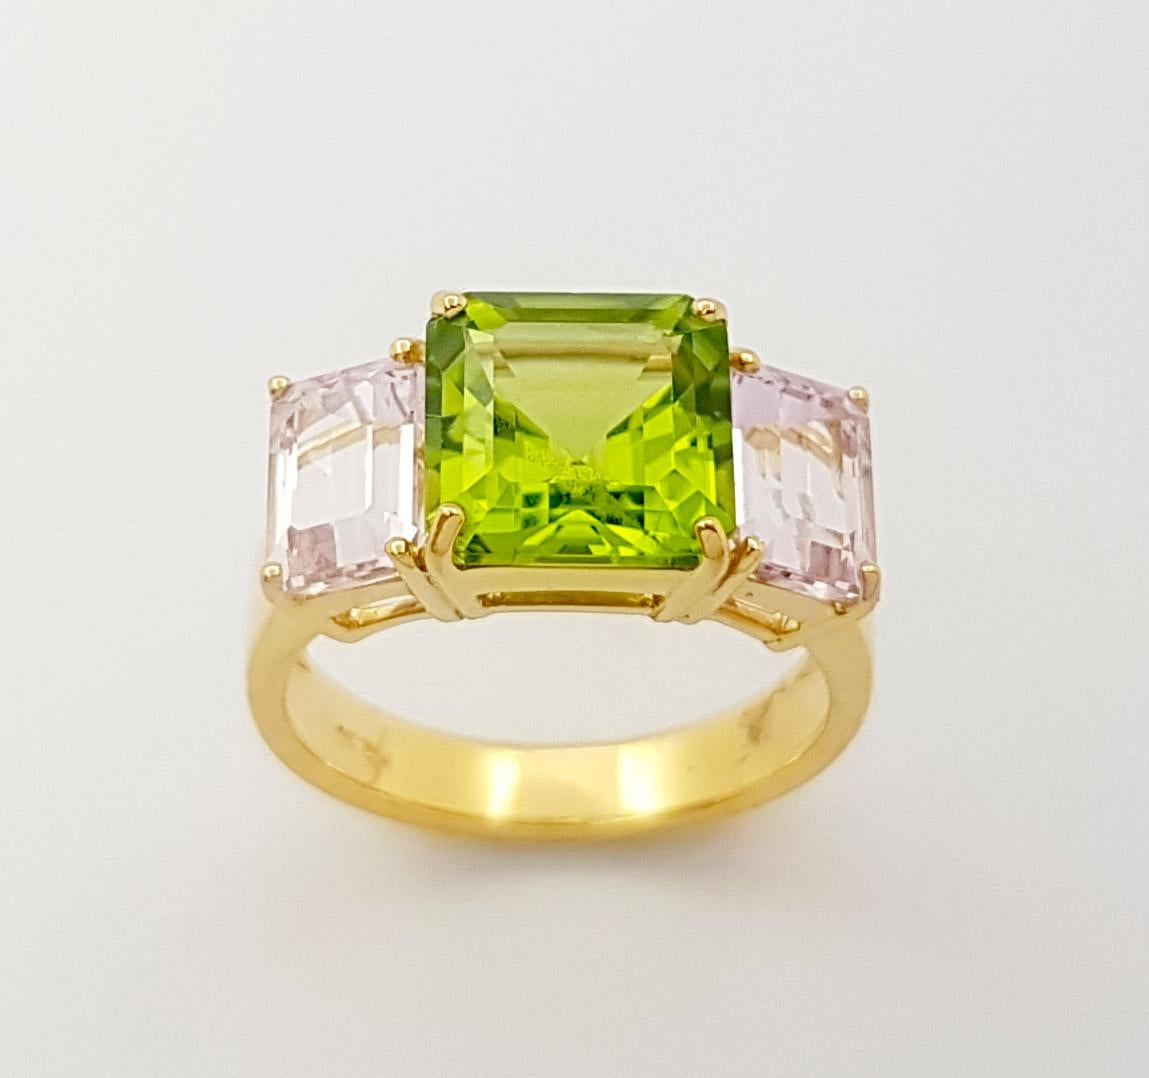 Peridot 3.95 carats with Morganite 2.28 carats Ring set in 18k Gold Settings For Sale 1